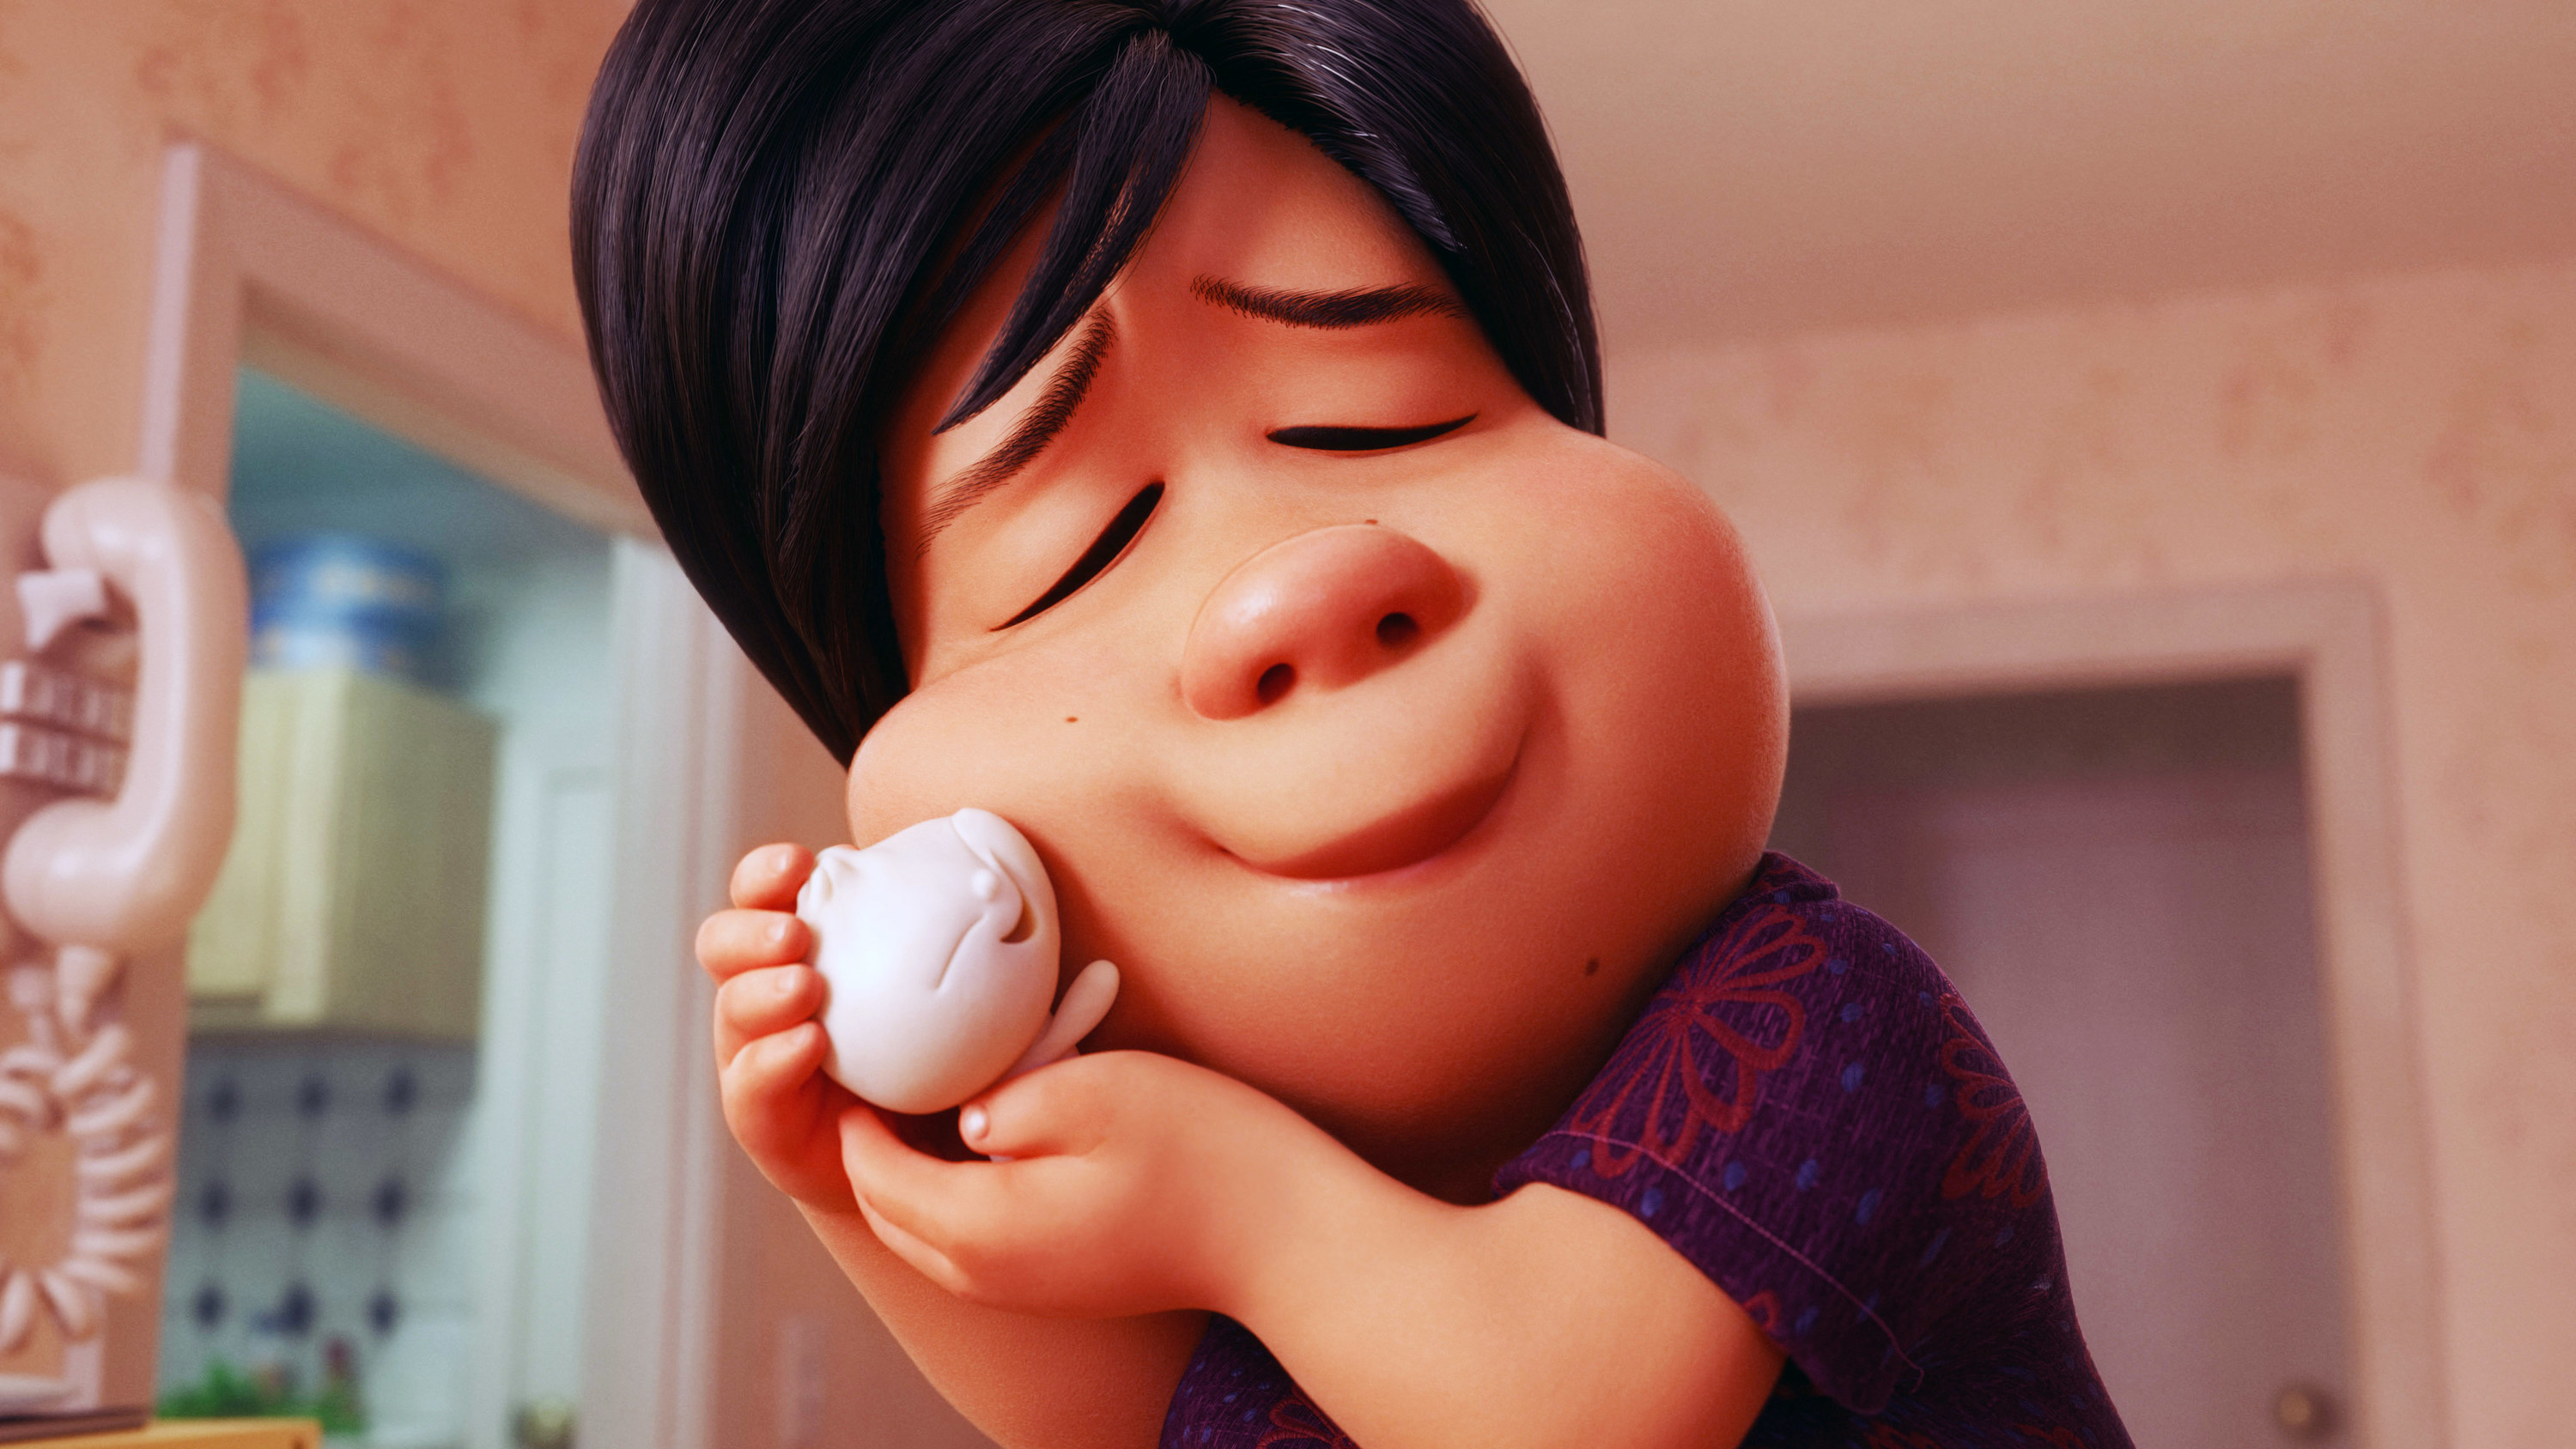 the mother cuddling Bao